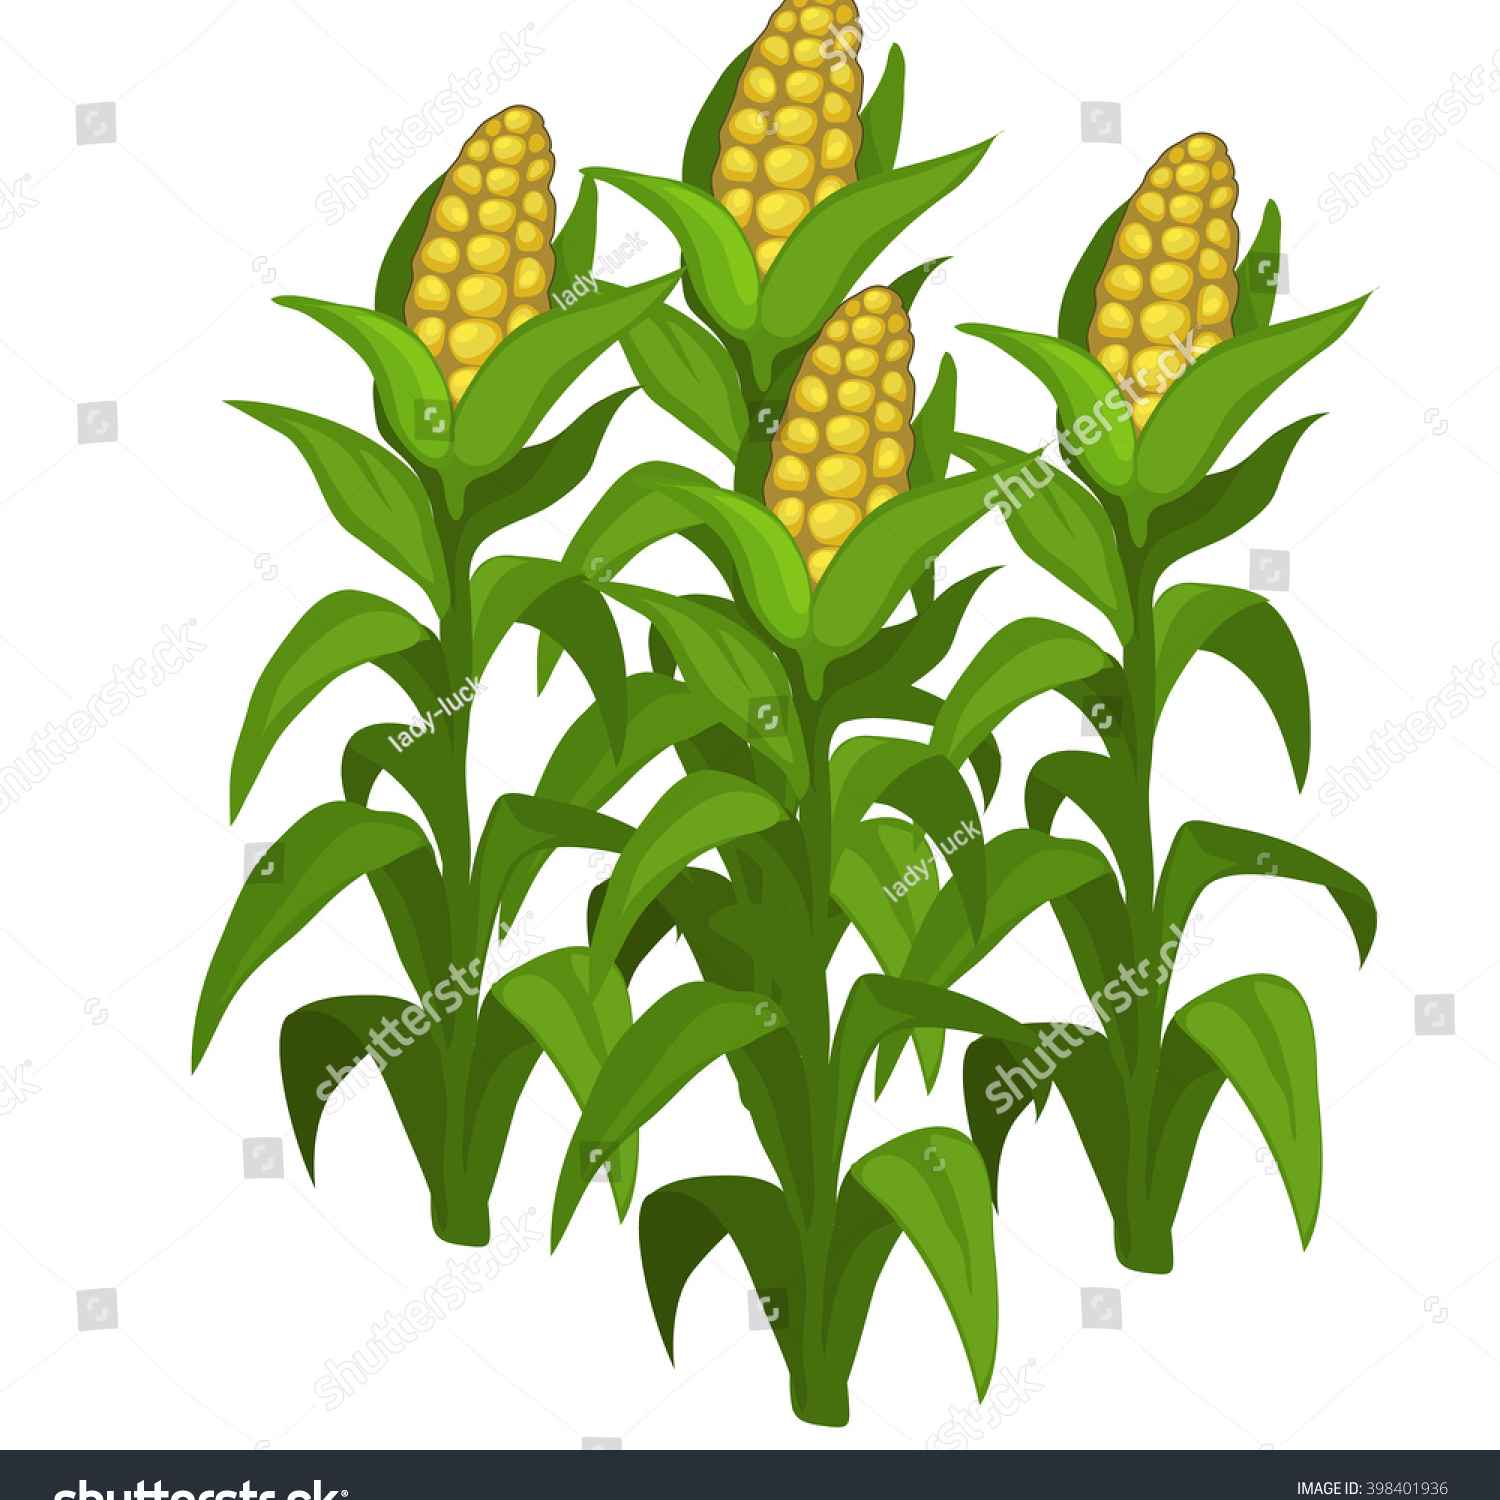 Corn clipart corn stock. Free download best on